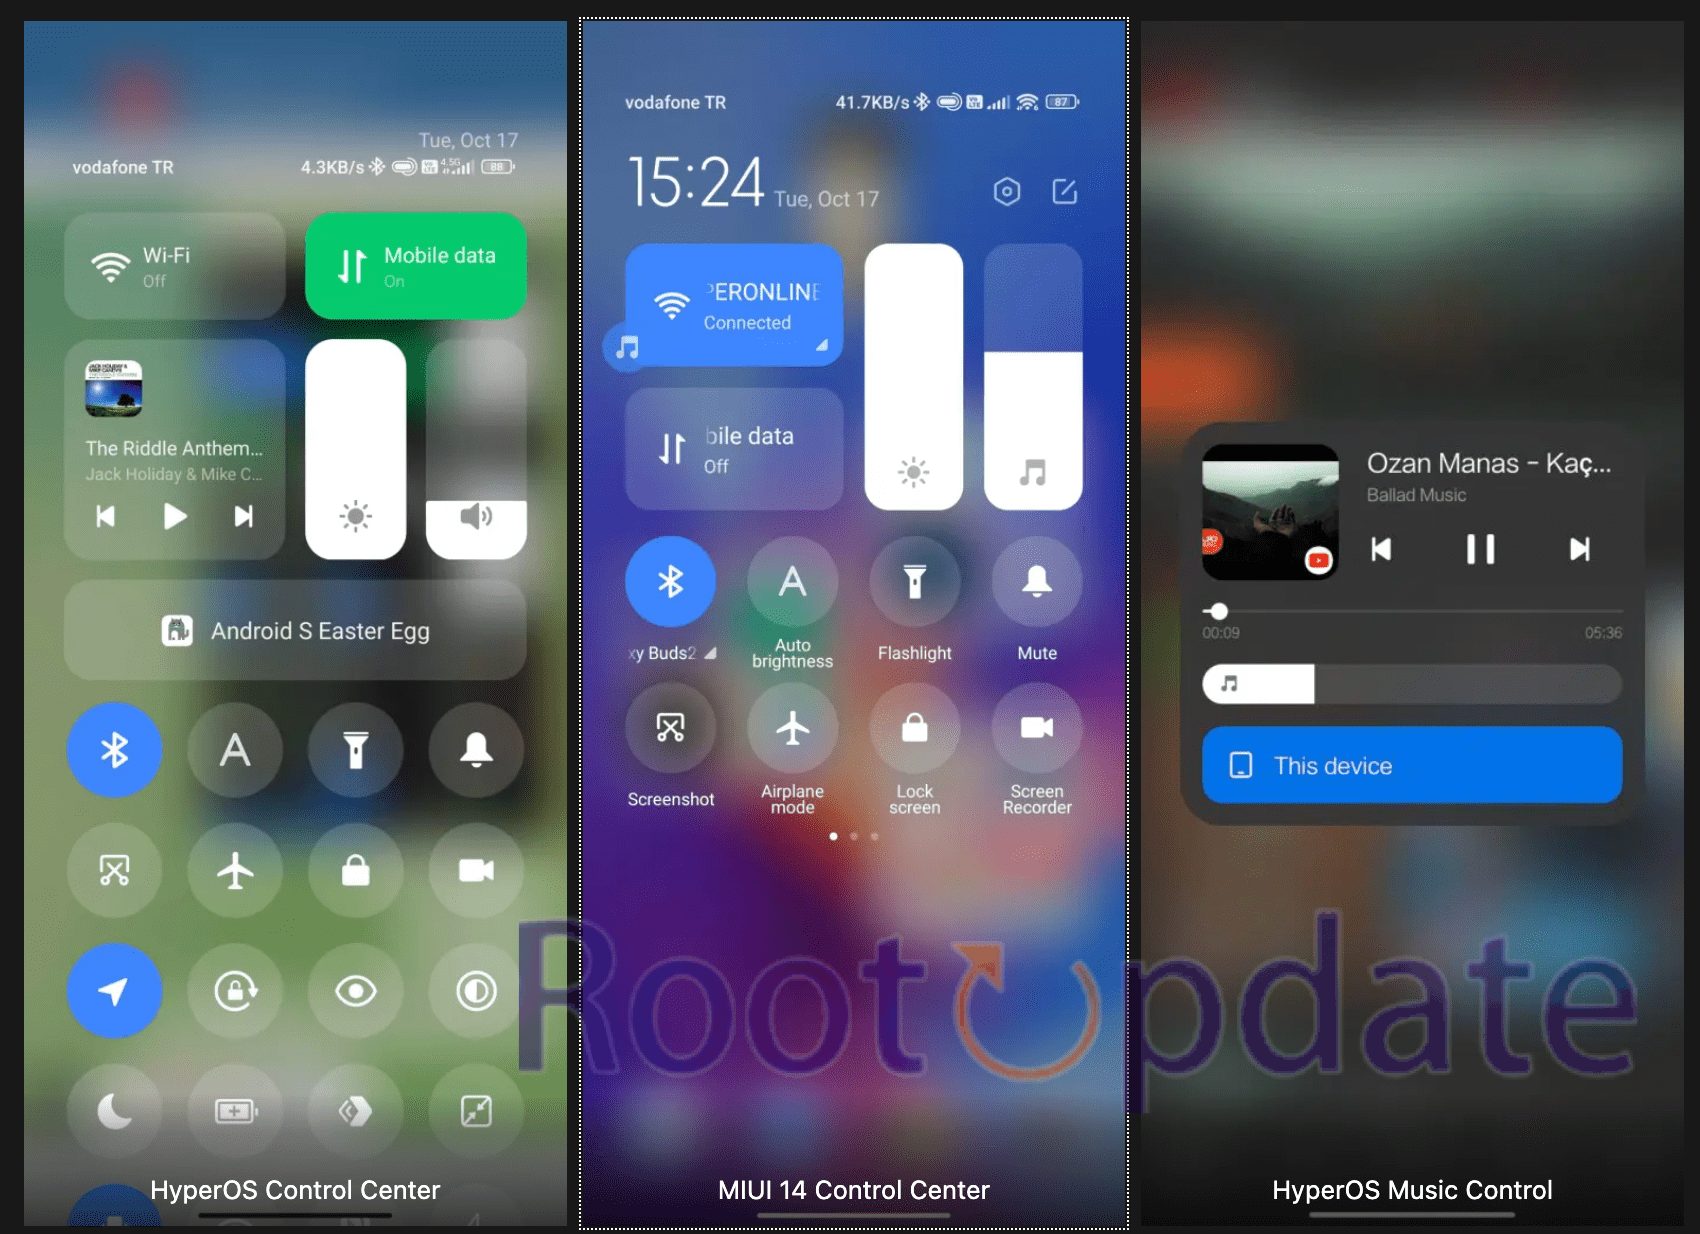 How to get HyperOS Control Center on MIUI 14